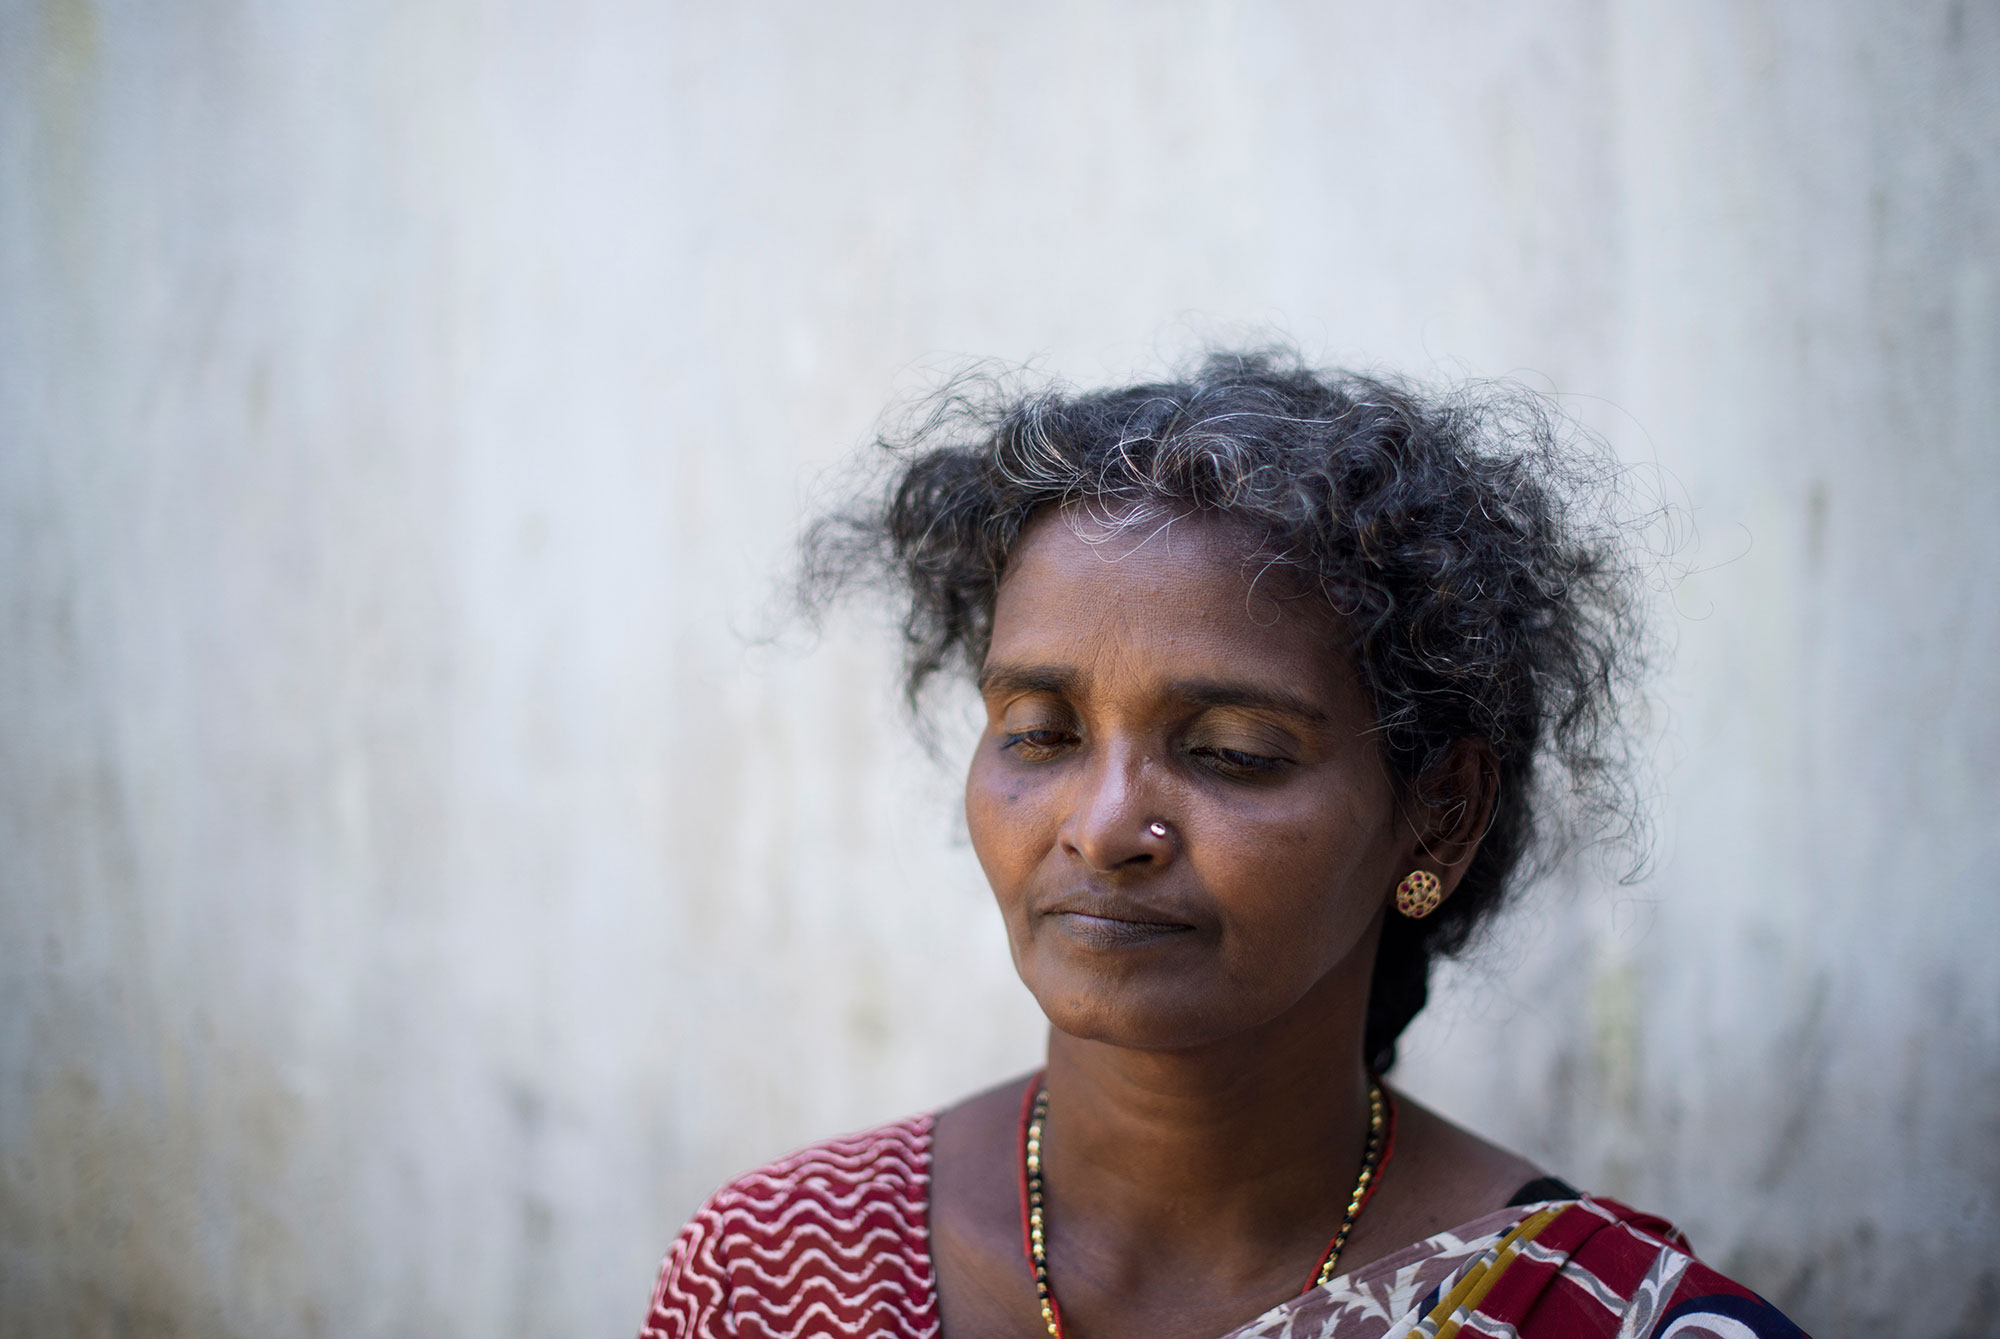 'In the last weeks of the war, my family had been dispersed, but on May 14, 2009, we all managed to get together in the 'safe zone' the army had established in Mullivaikal. They said civilians wouldn't be harmed there, so we found shelter in a small house ... We were happy to be together at last. But that same night, the building was shelled ... My husband was lying on the ground and, when I turned him around, I saw his chest open. He was dead. Next to him was my oldest daughter. She was holding her intestines in her hands, sure that she was going to die,' remembers Balasubramaniam Annaludchumy, who lost five members of her family that night. 